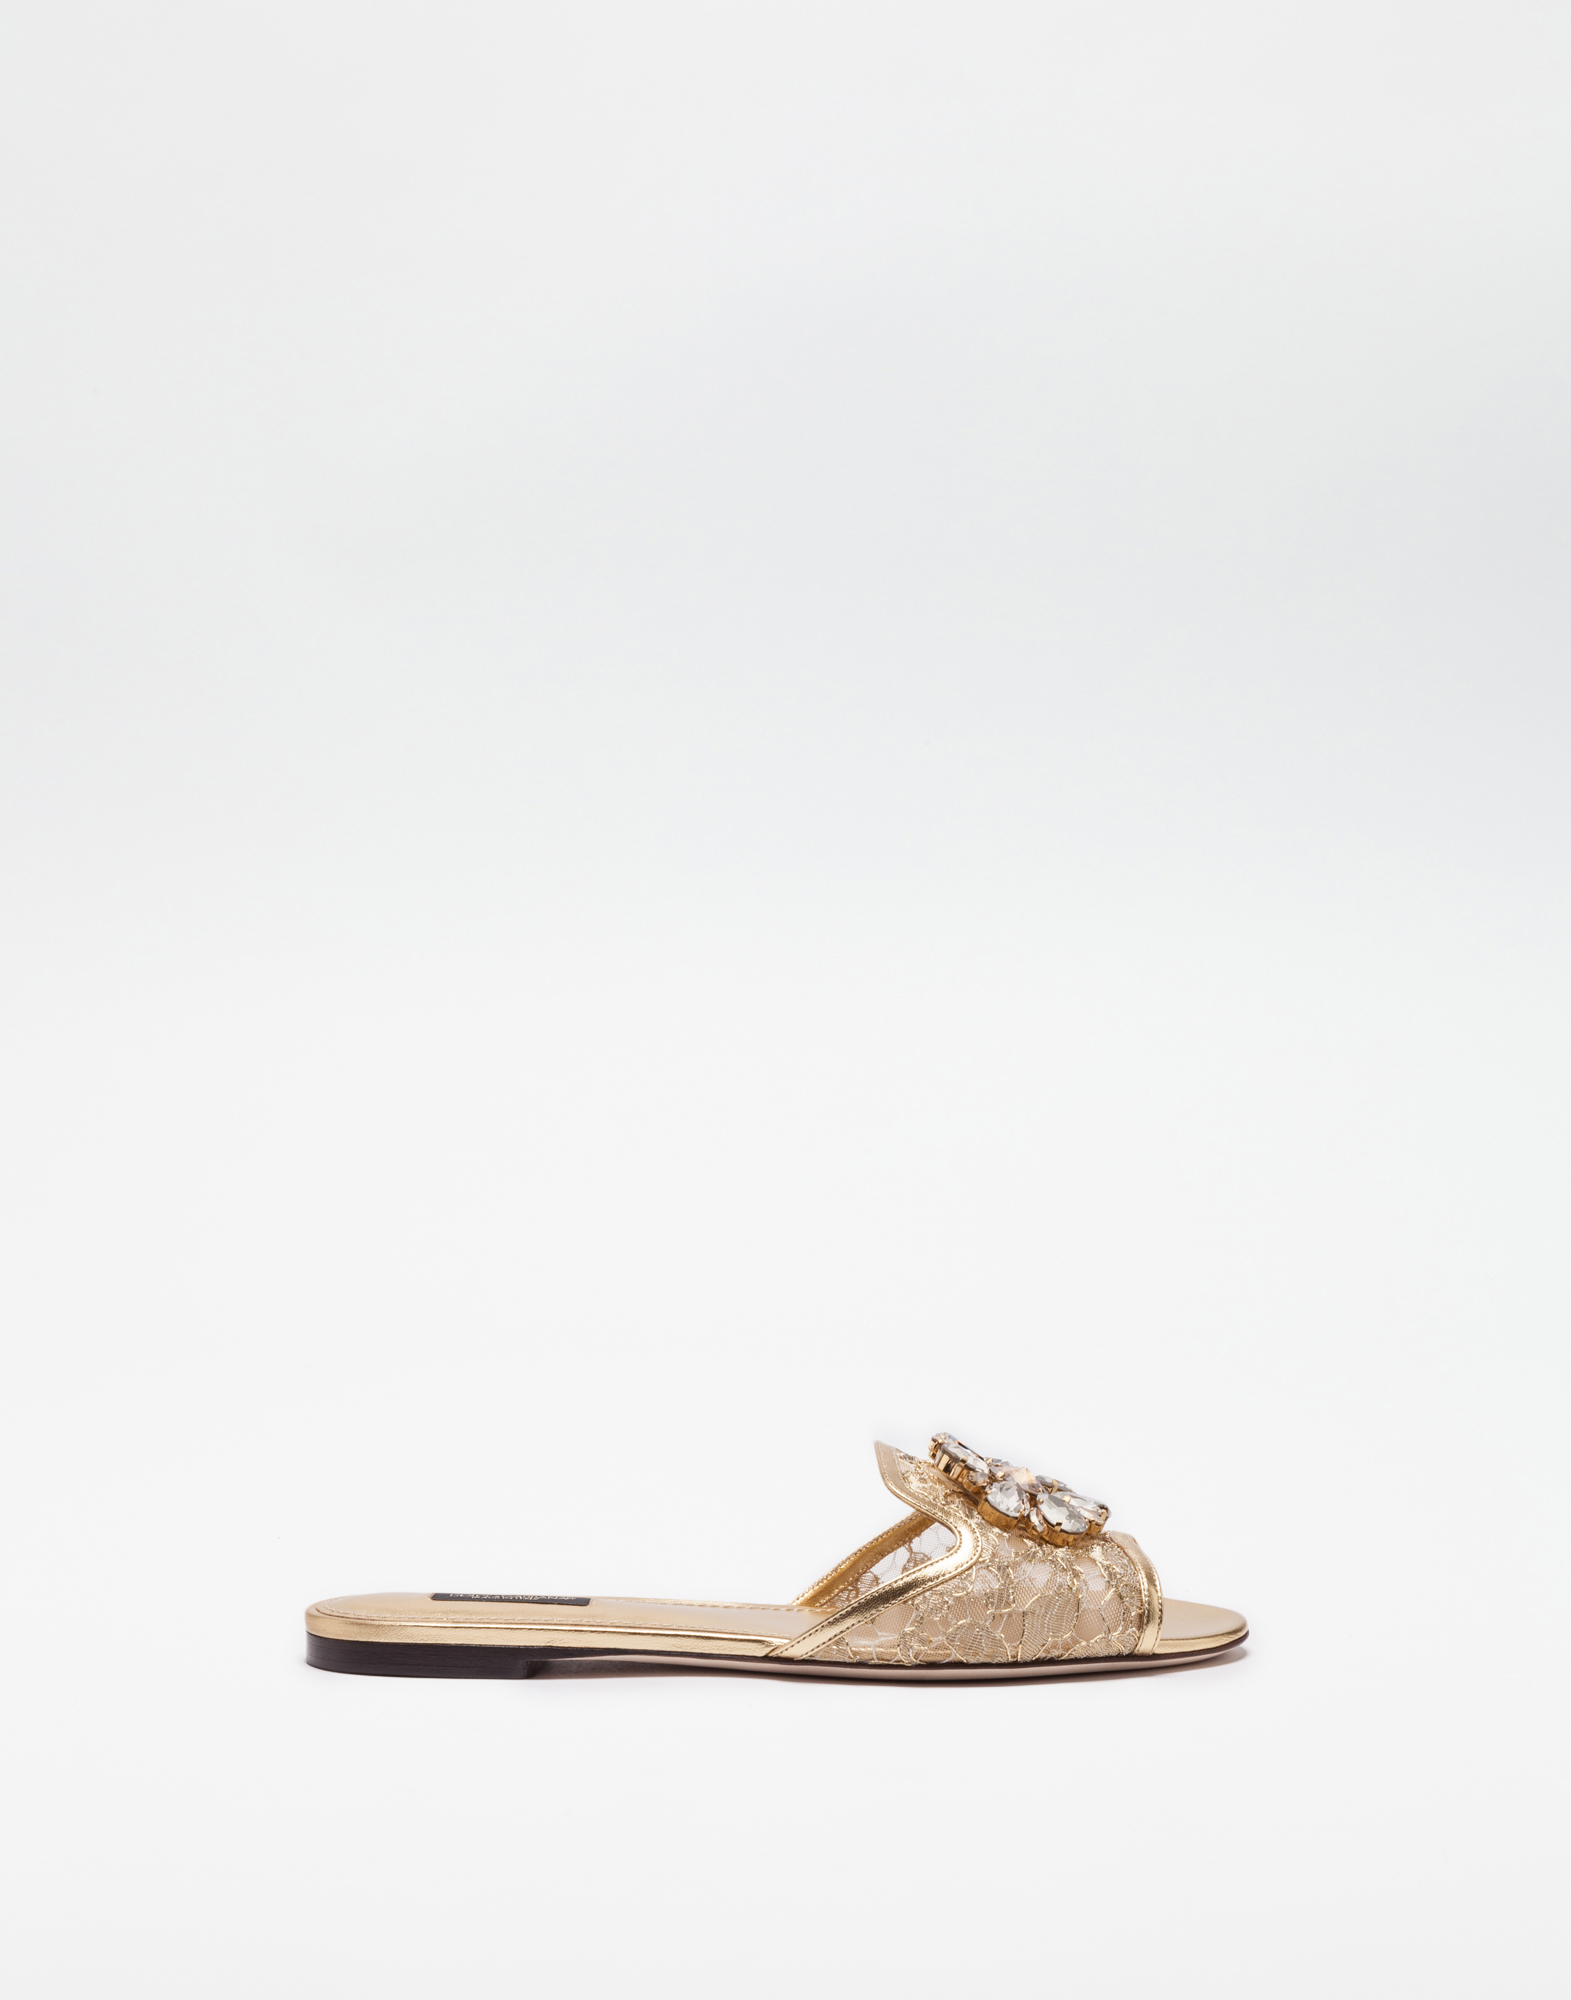 Lurex lace rainbow slides with brooch detailing in Gold